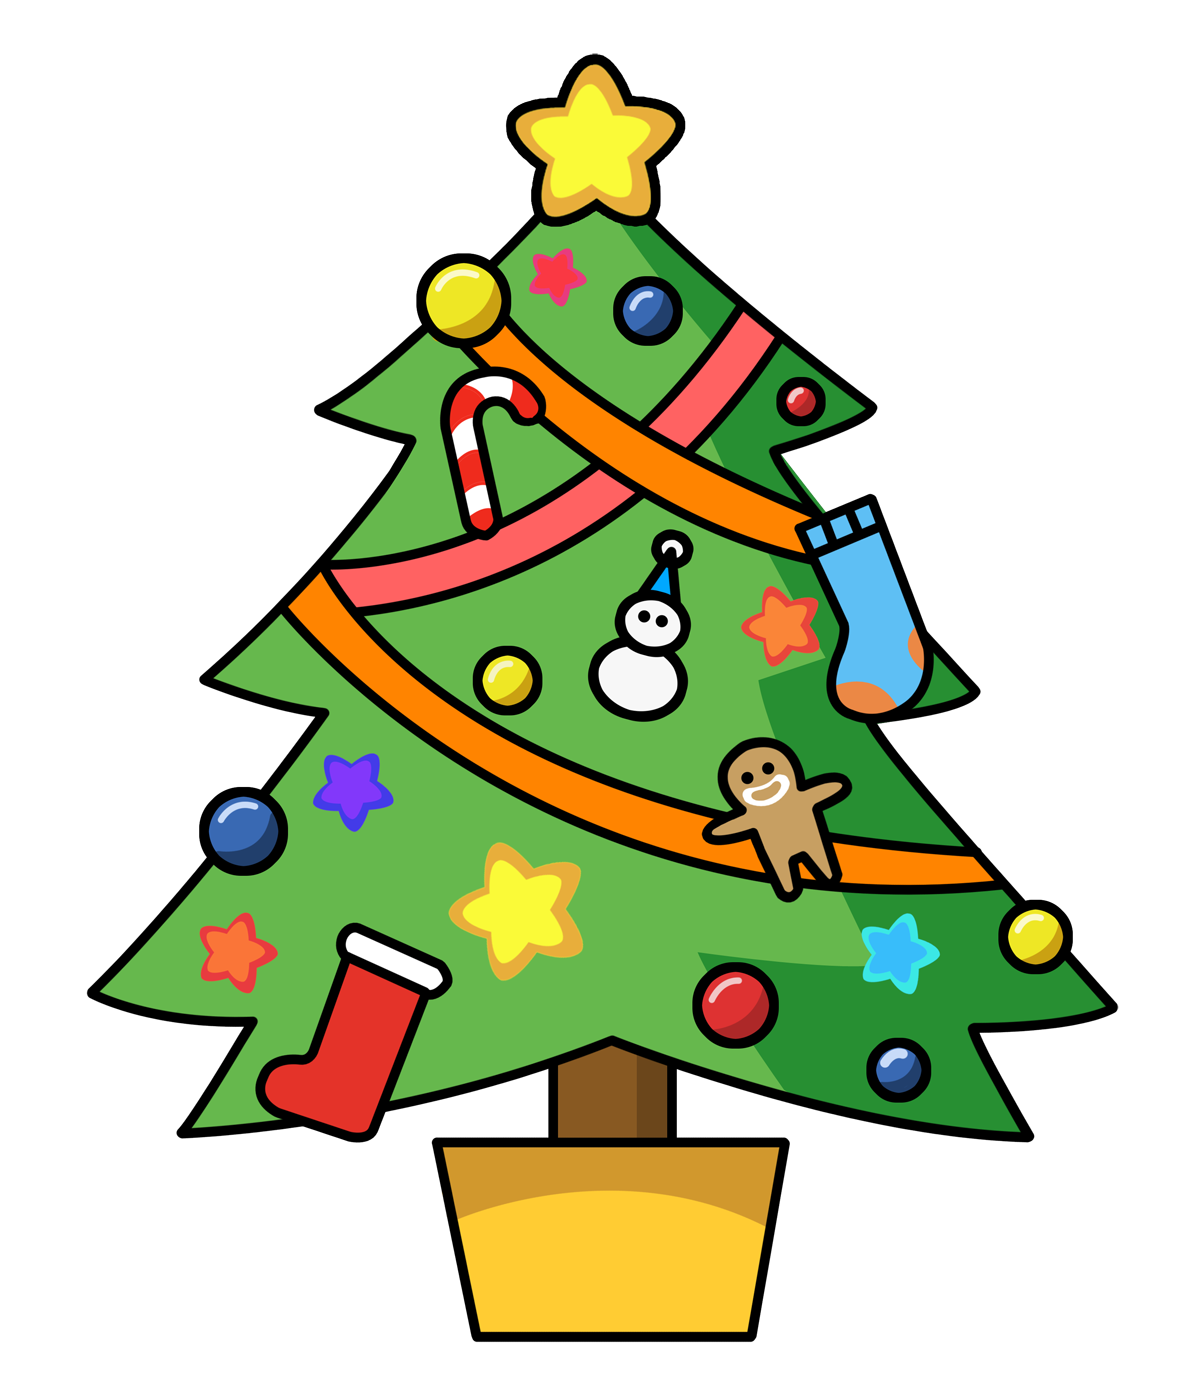 Christmas trees pictures clip art - ClipartFox